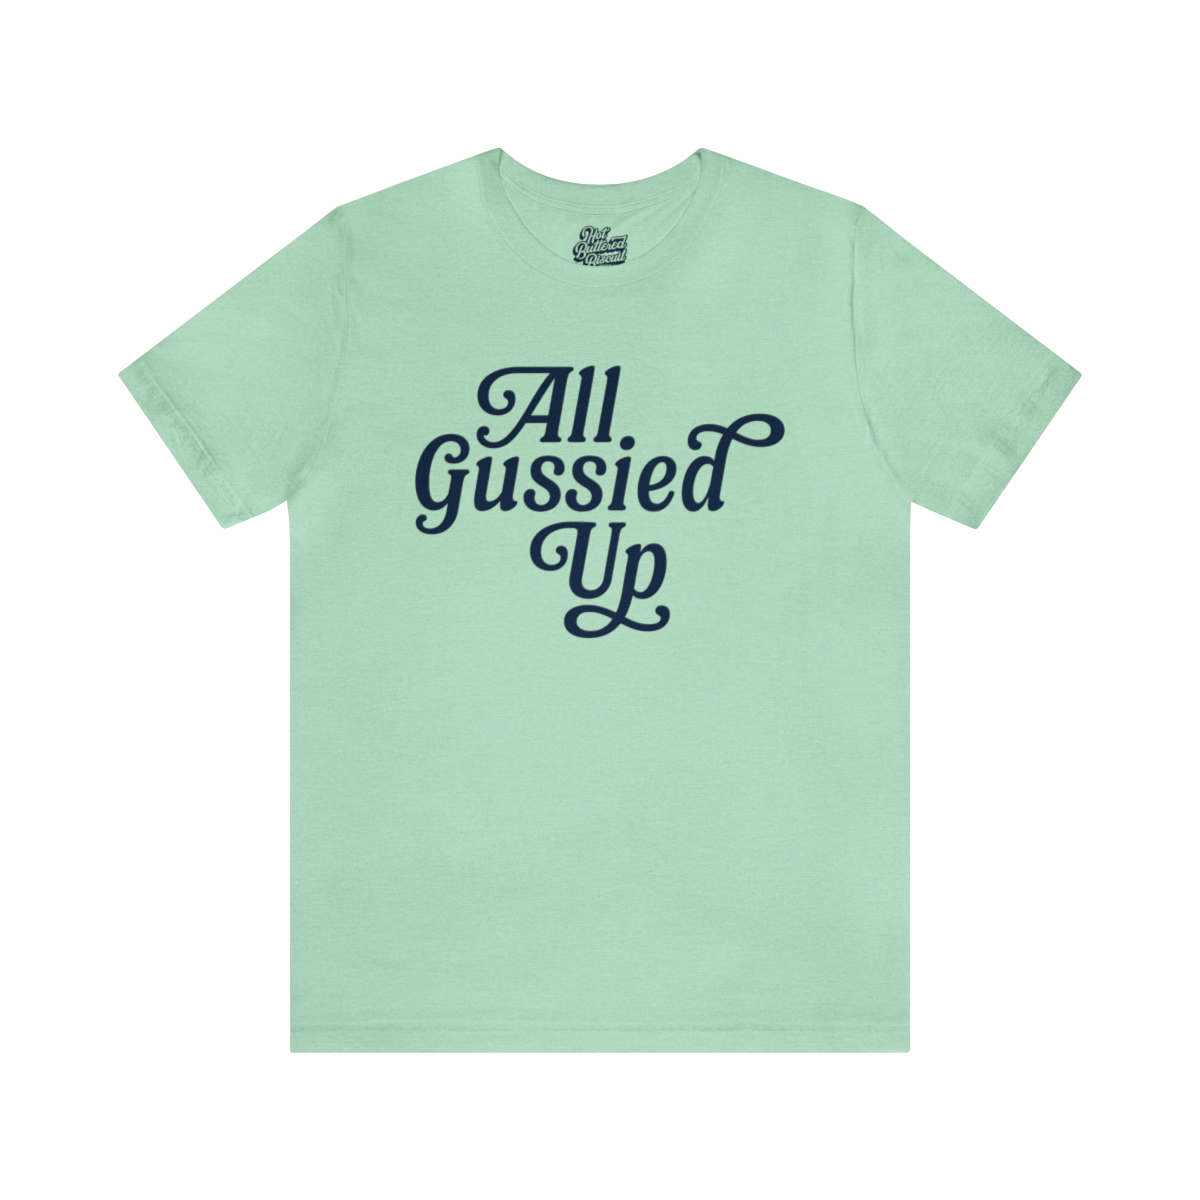 Introducing our “All Gussied Up” shirt – the perfectshirt whether you’re an Oklahoma Smokeshow fixin’ to hit the town or just want to add a touch of flair. With a…